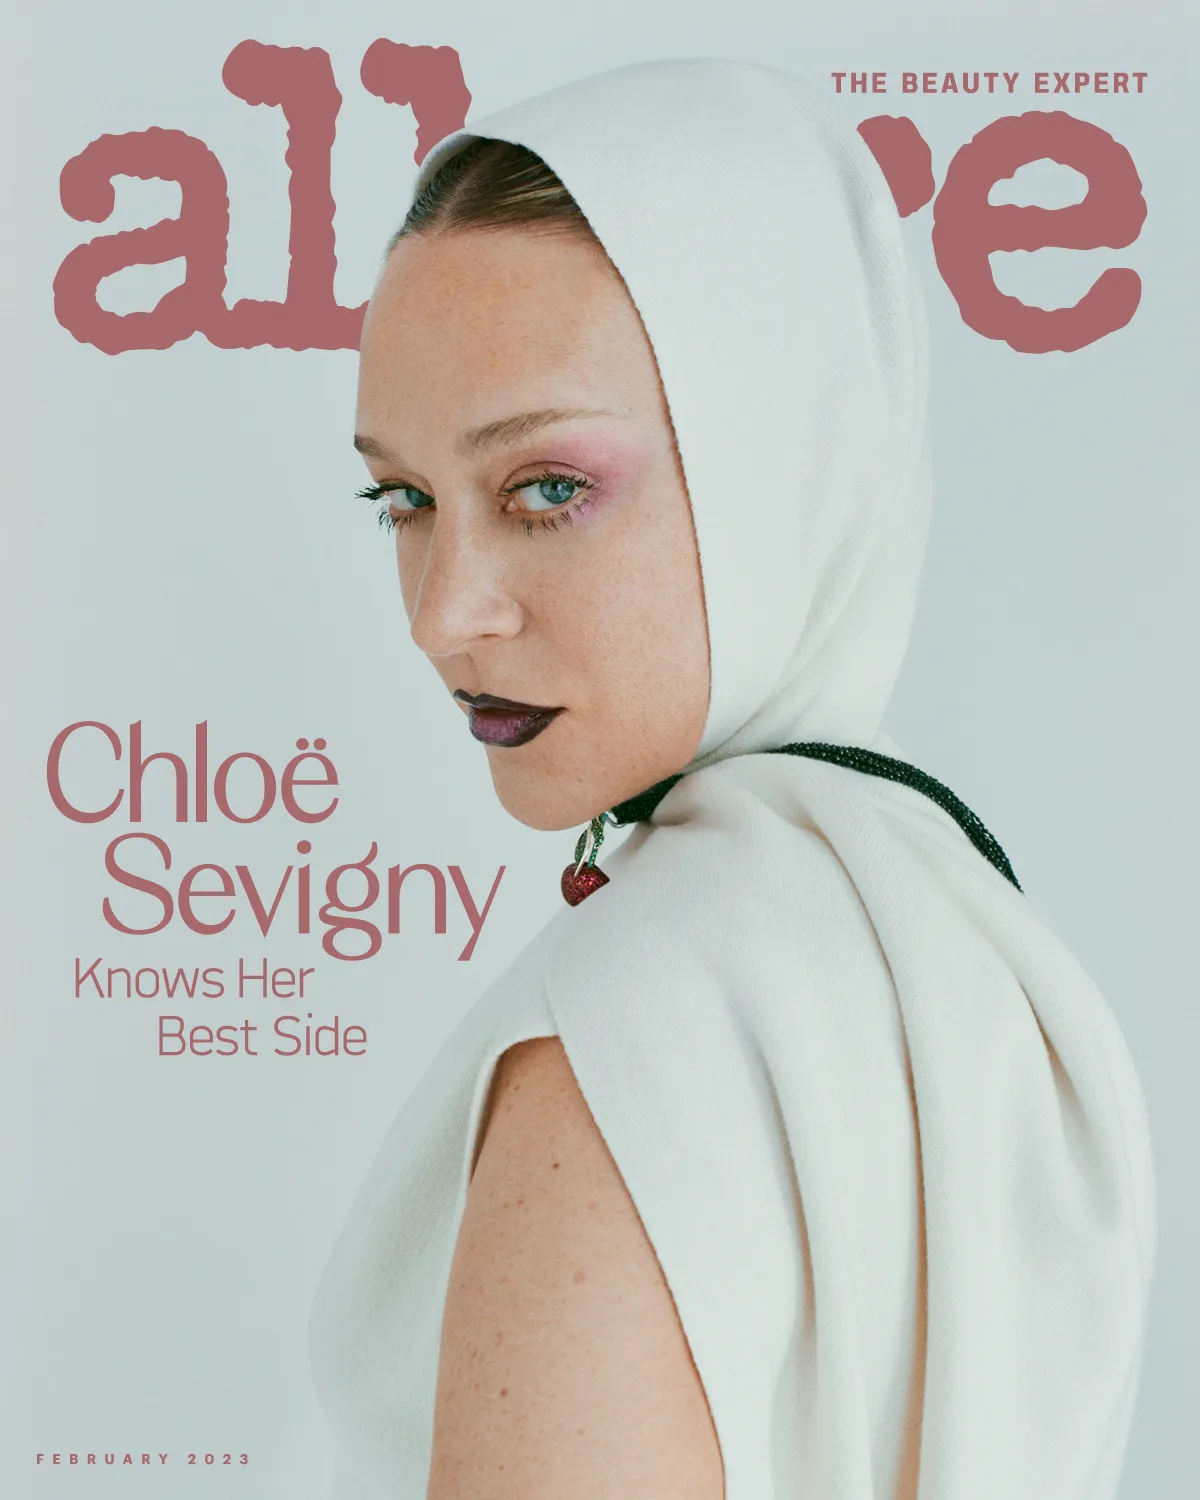 Chloë Sevigny covers Allure US February 2023 by Andrew Vowles